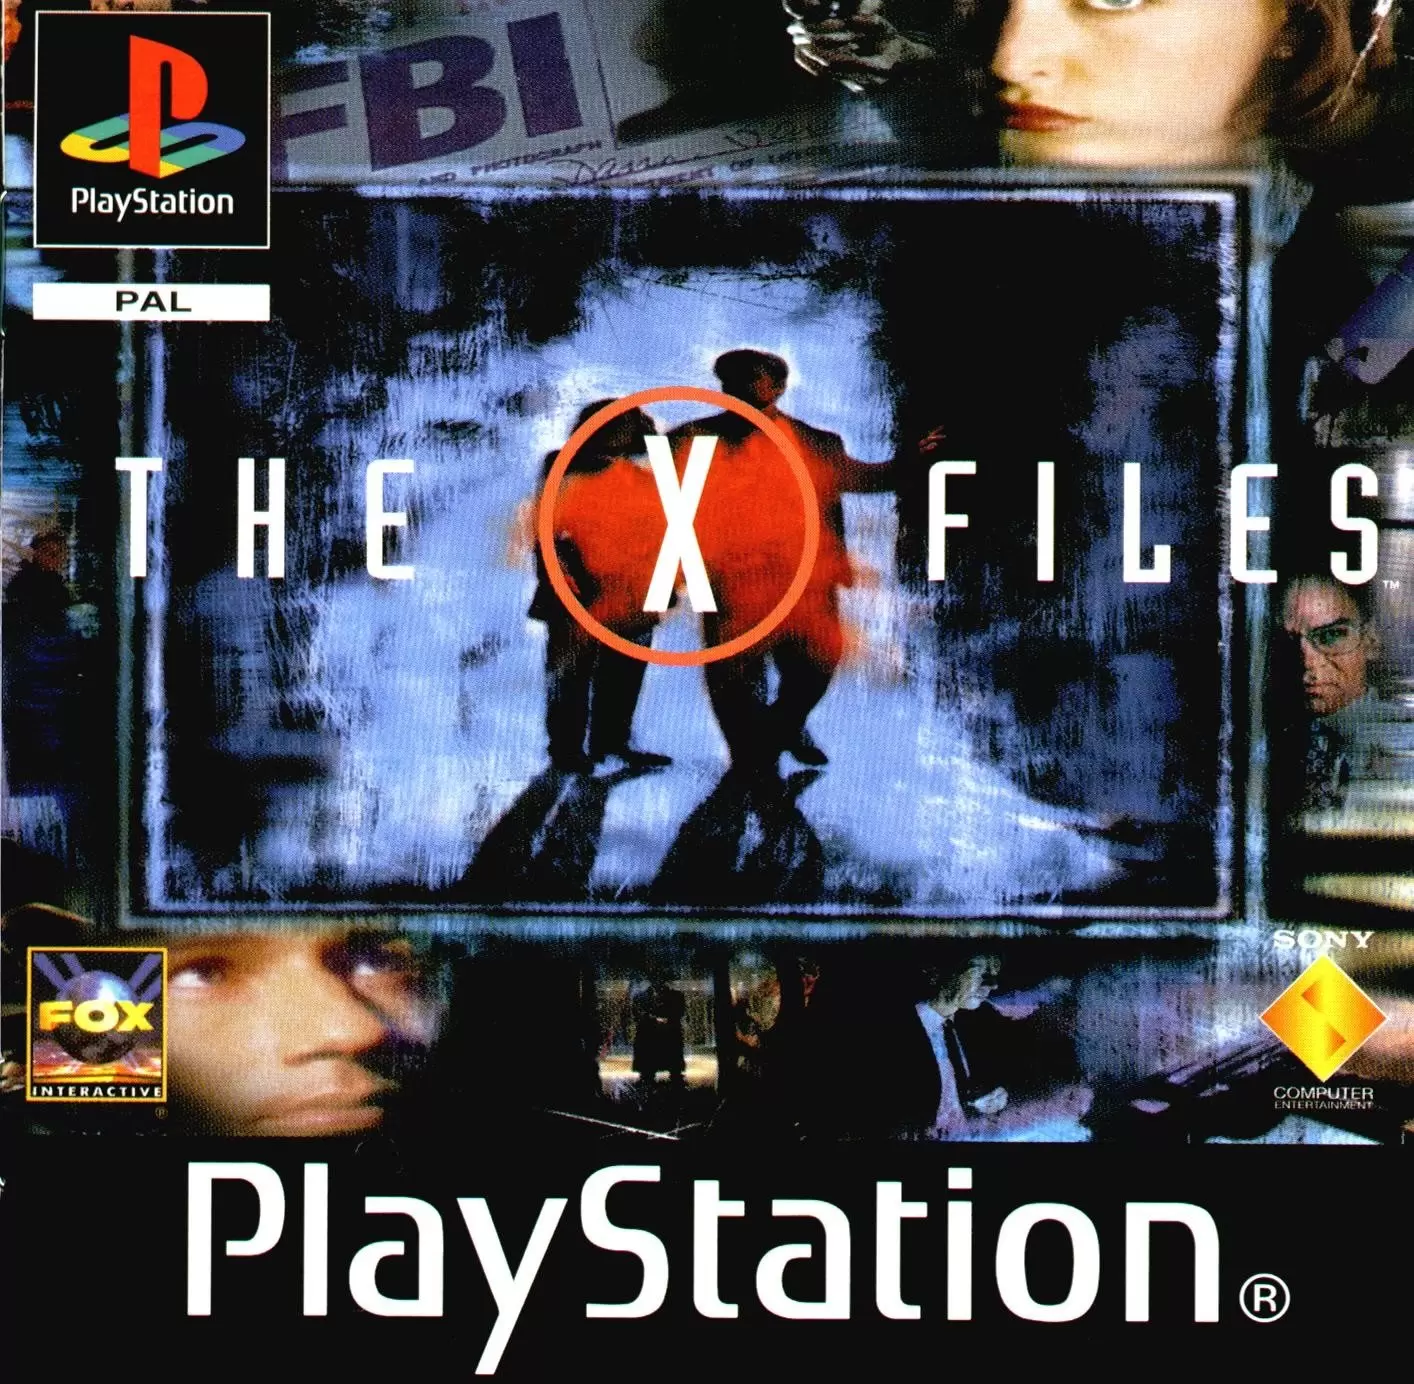 Playstation games - The X-Files